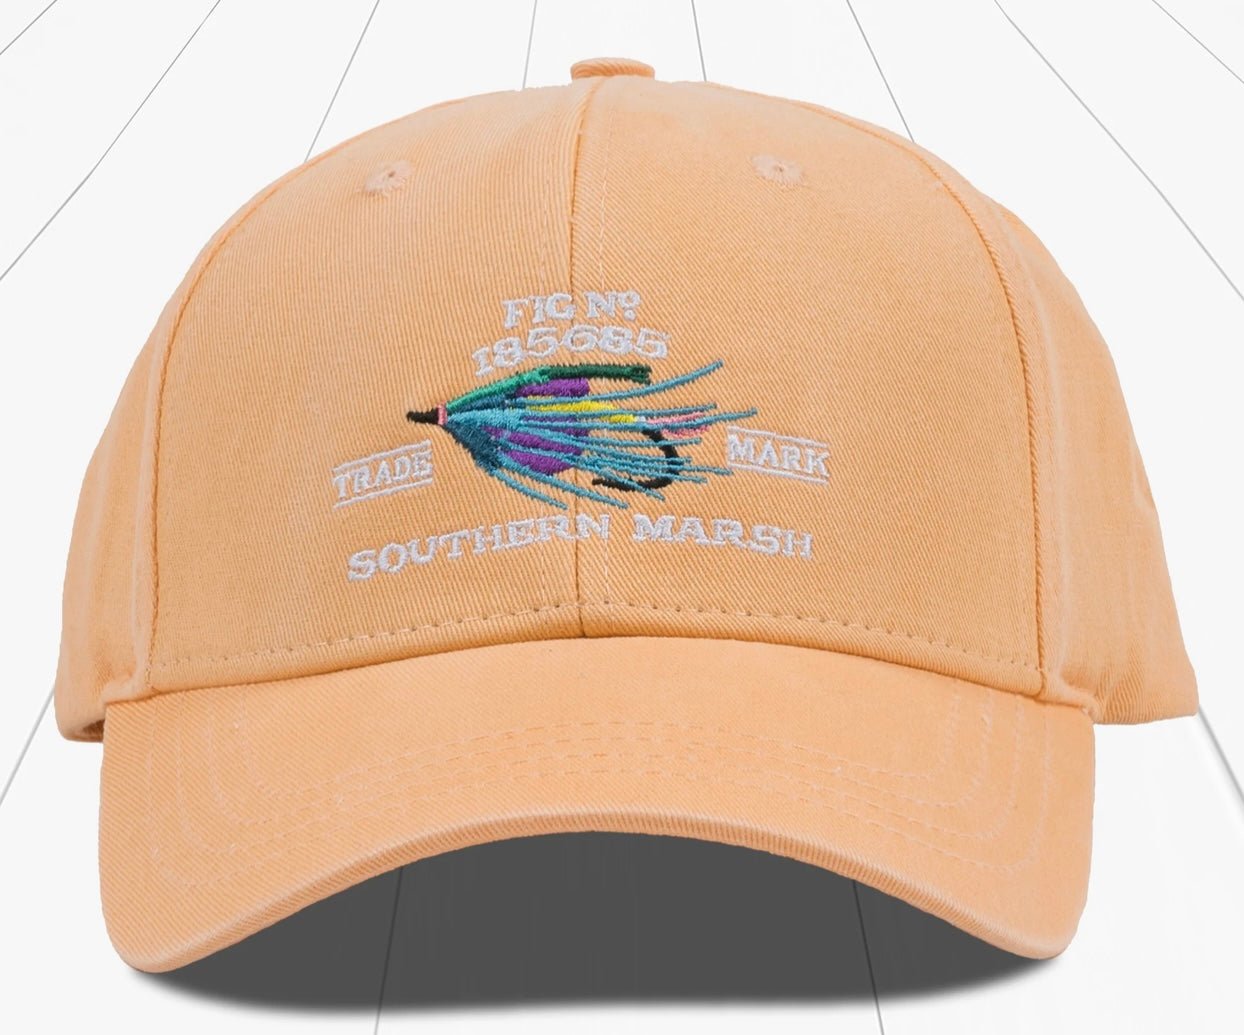 Southern Marsh Gunnison Embroidered Hat - Washed Peach - Jimberly's Boutique